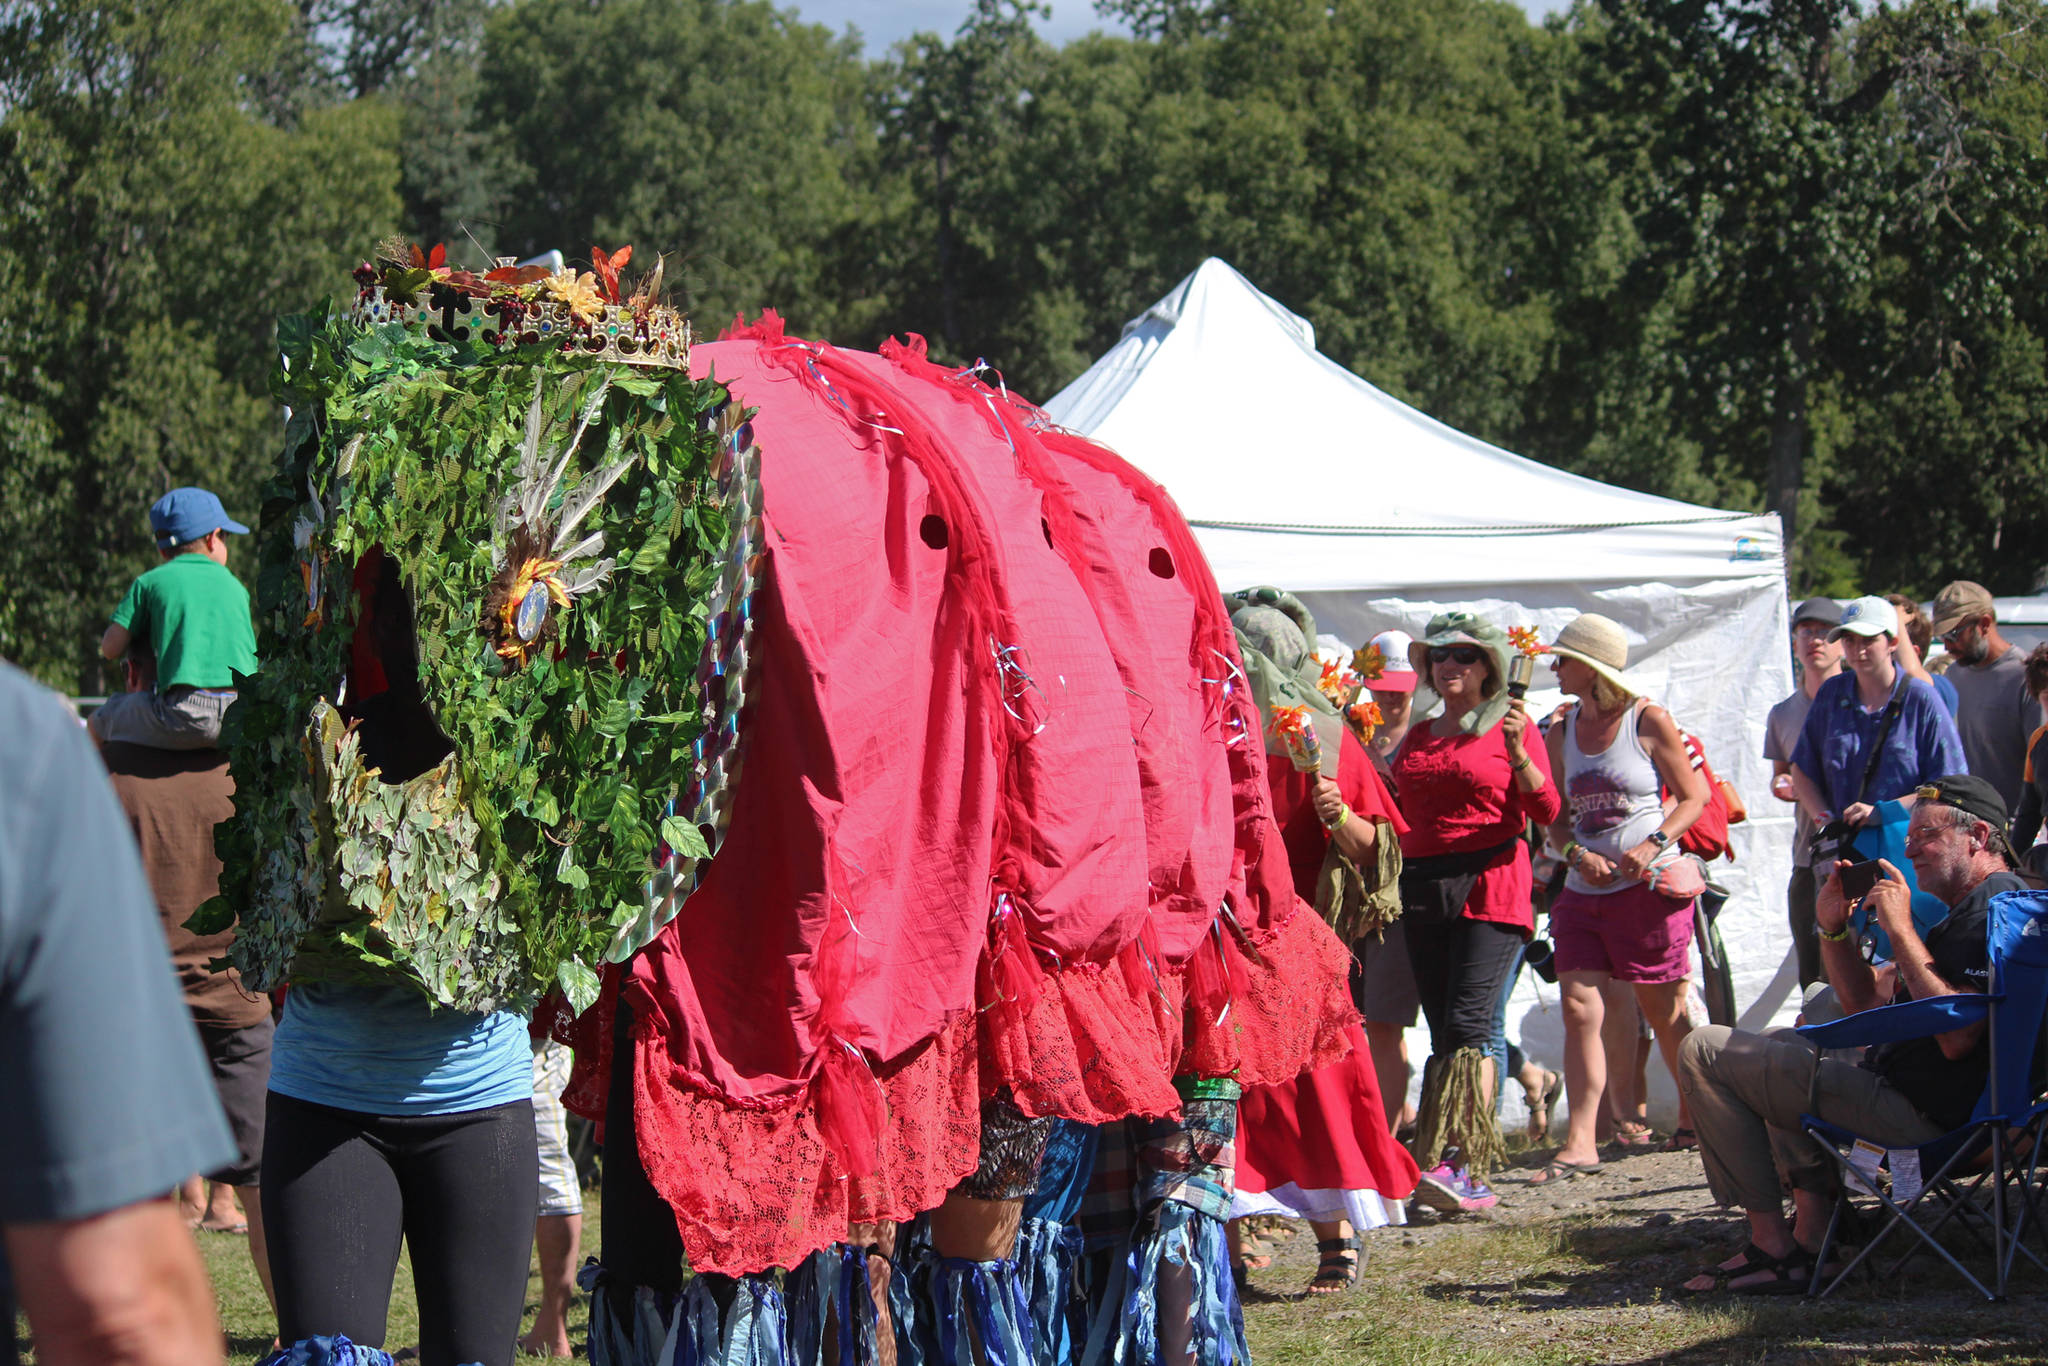 Participants in an aeirial art installation march through the Kenai Peninsula Fairgrounds, with a king salmon leading the way, at this year’s Salmonfest on Saturday, Aug. 4, 2018 in Ninilchik, Alaska. Homer artist Mavis Muller designs the art installation each year, with a message about salmon or water. (Photo by Megan Pacer/Homer News)